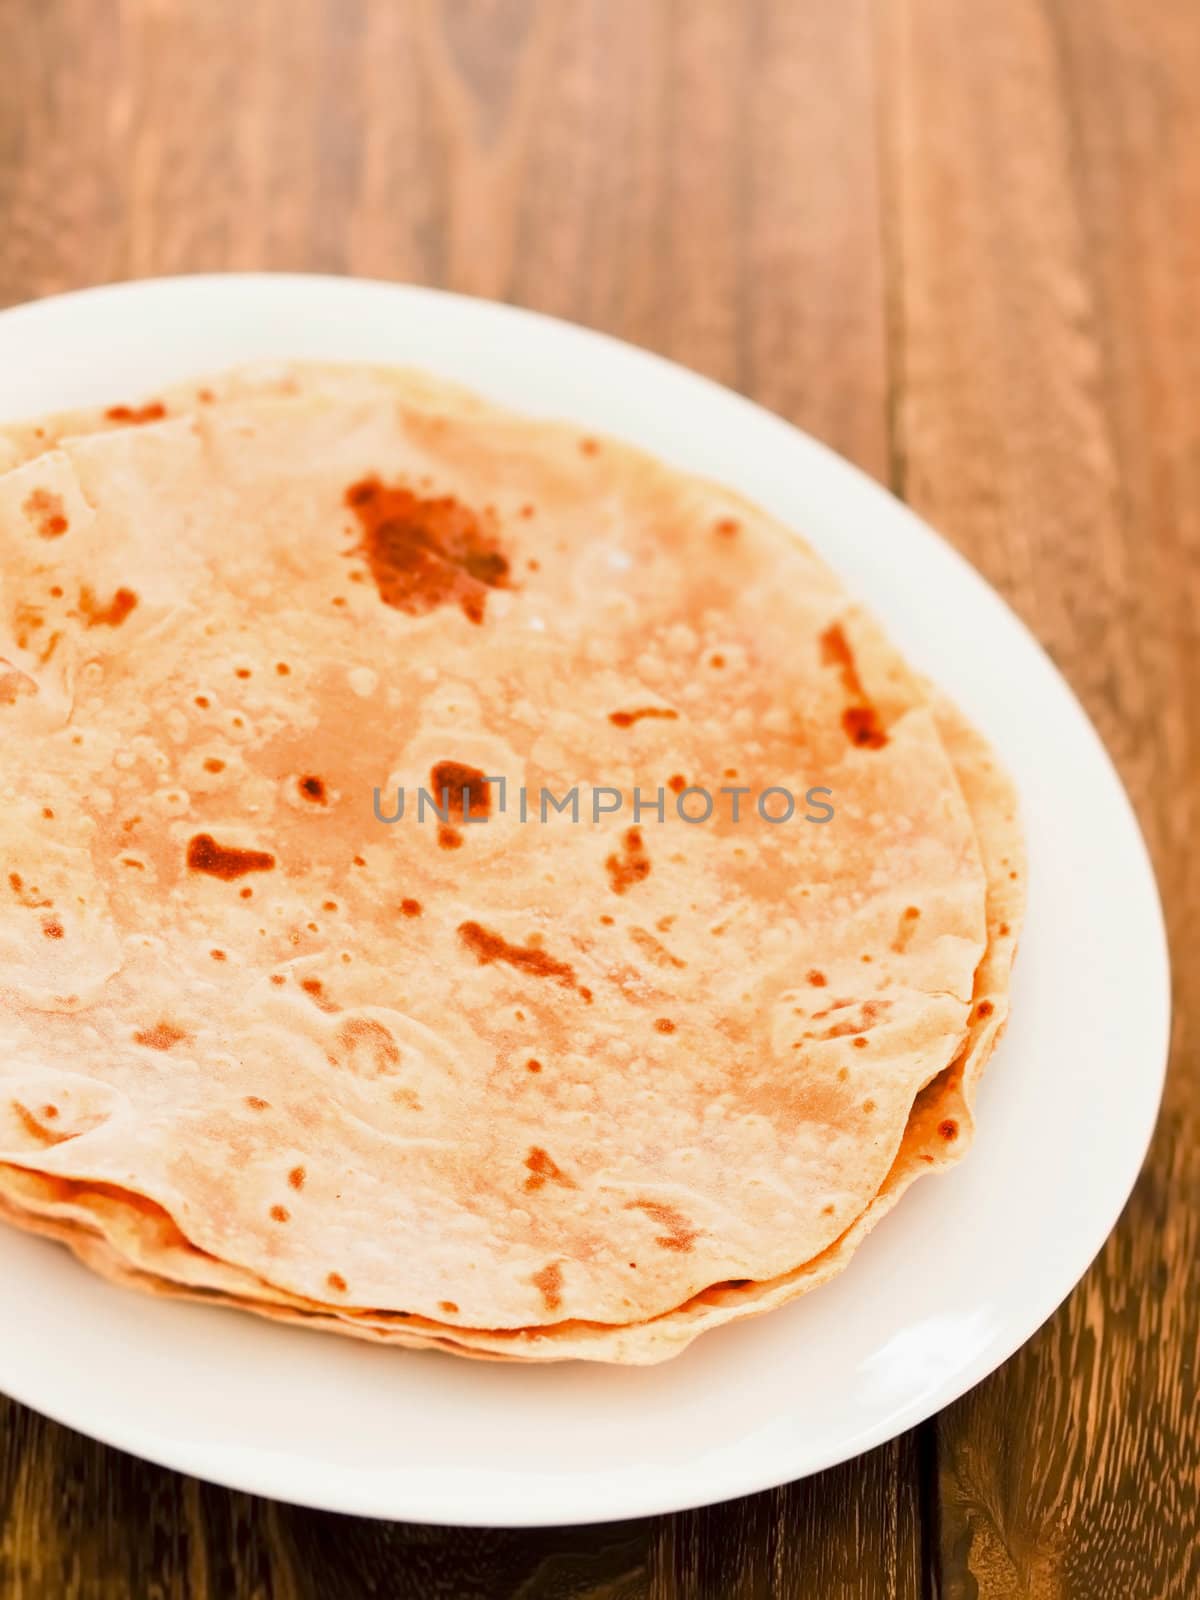 chapati by zkruger